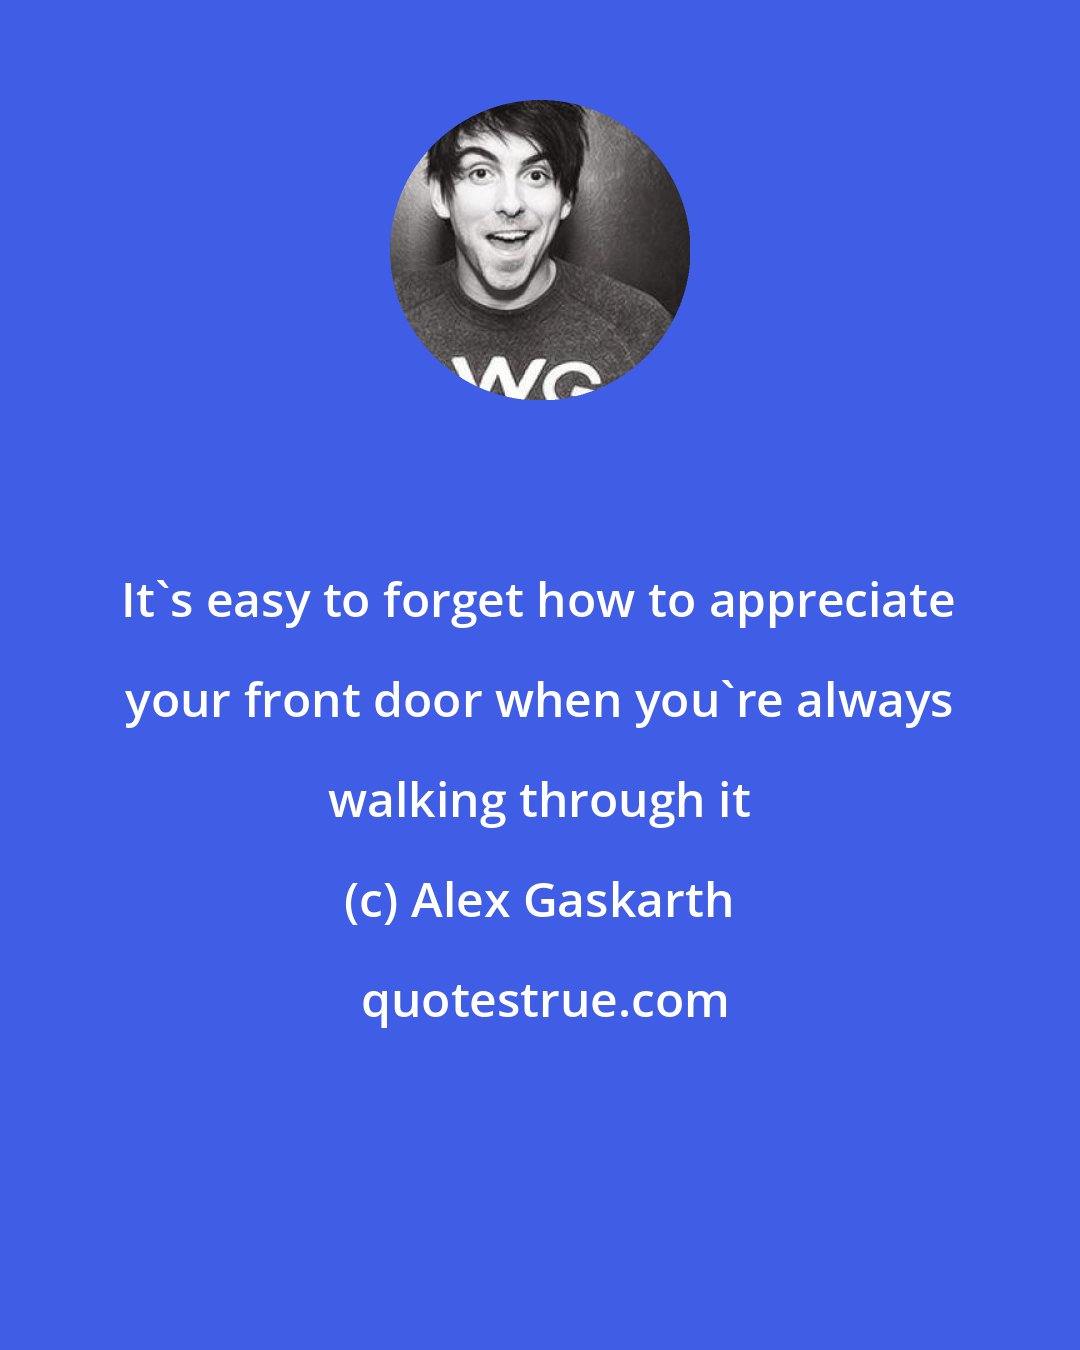 Alex Gaskarth: It's easy to forget how to appreciate your front door when you're always walking through it